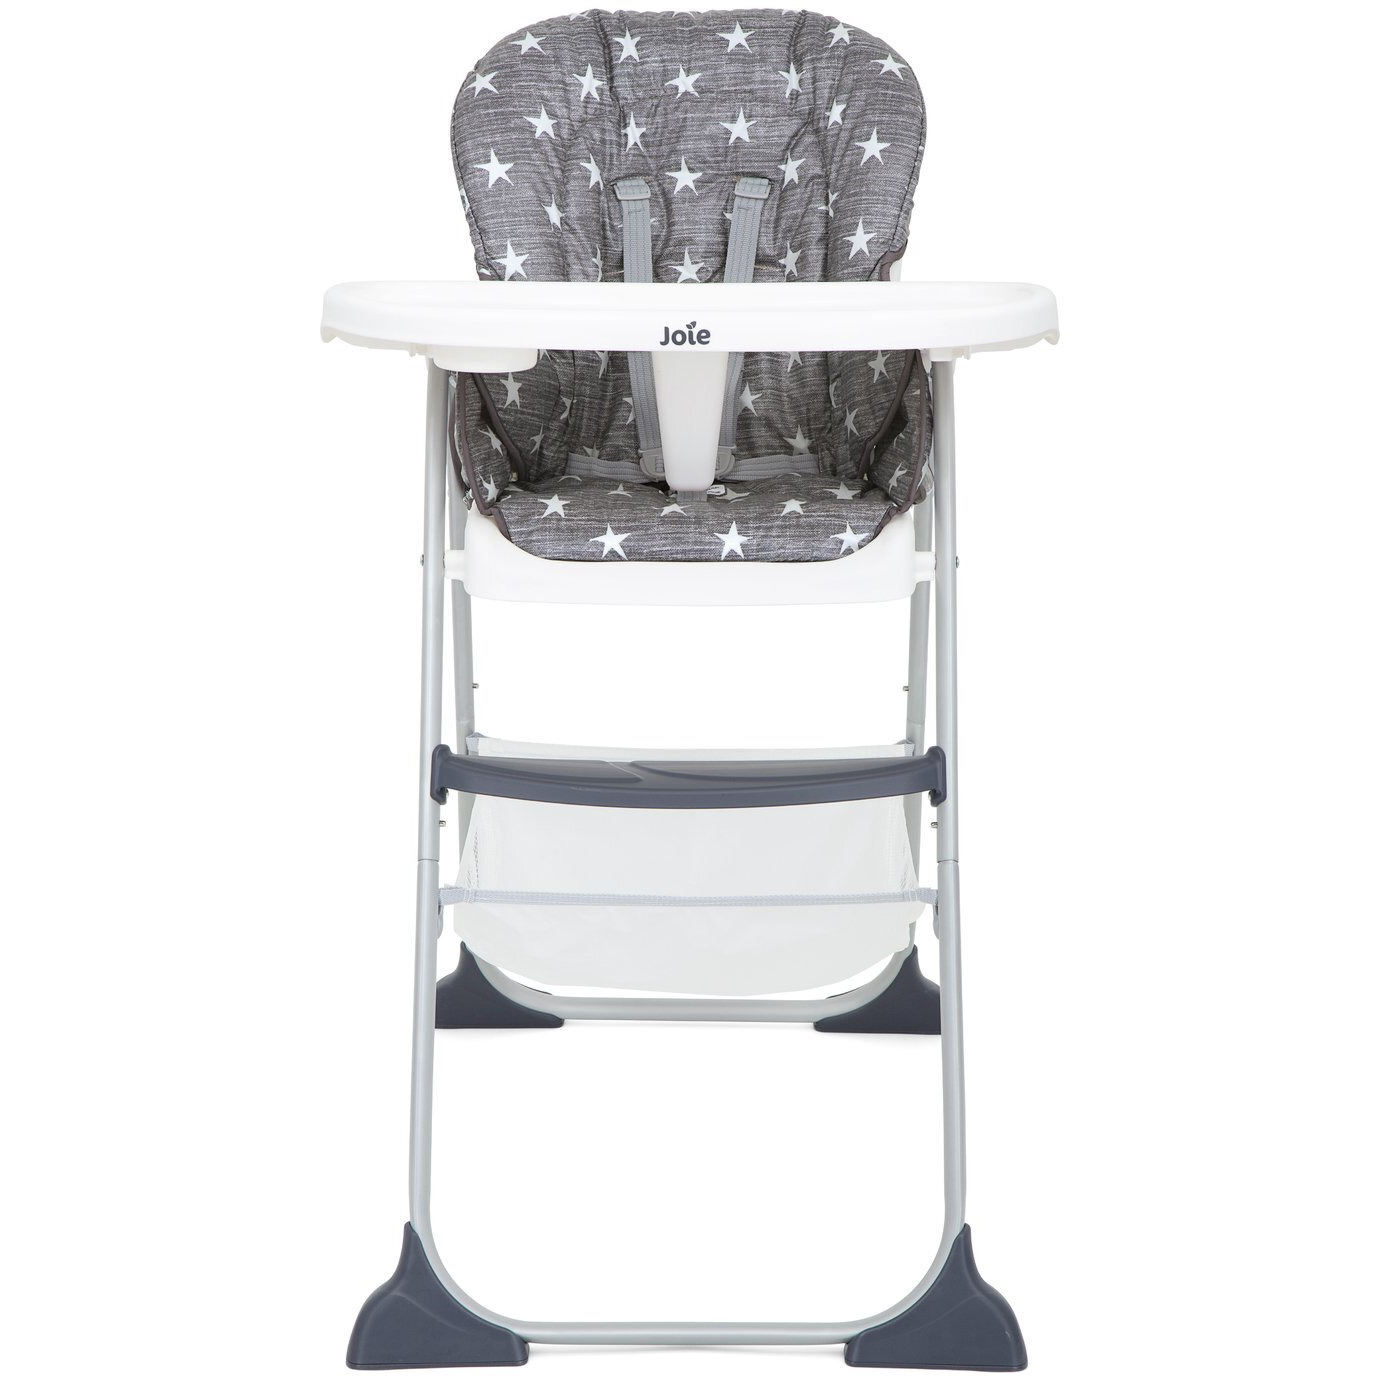 Joie Mimsy Snacker Highchair - Twinkle - image 1